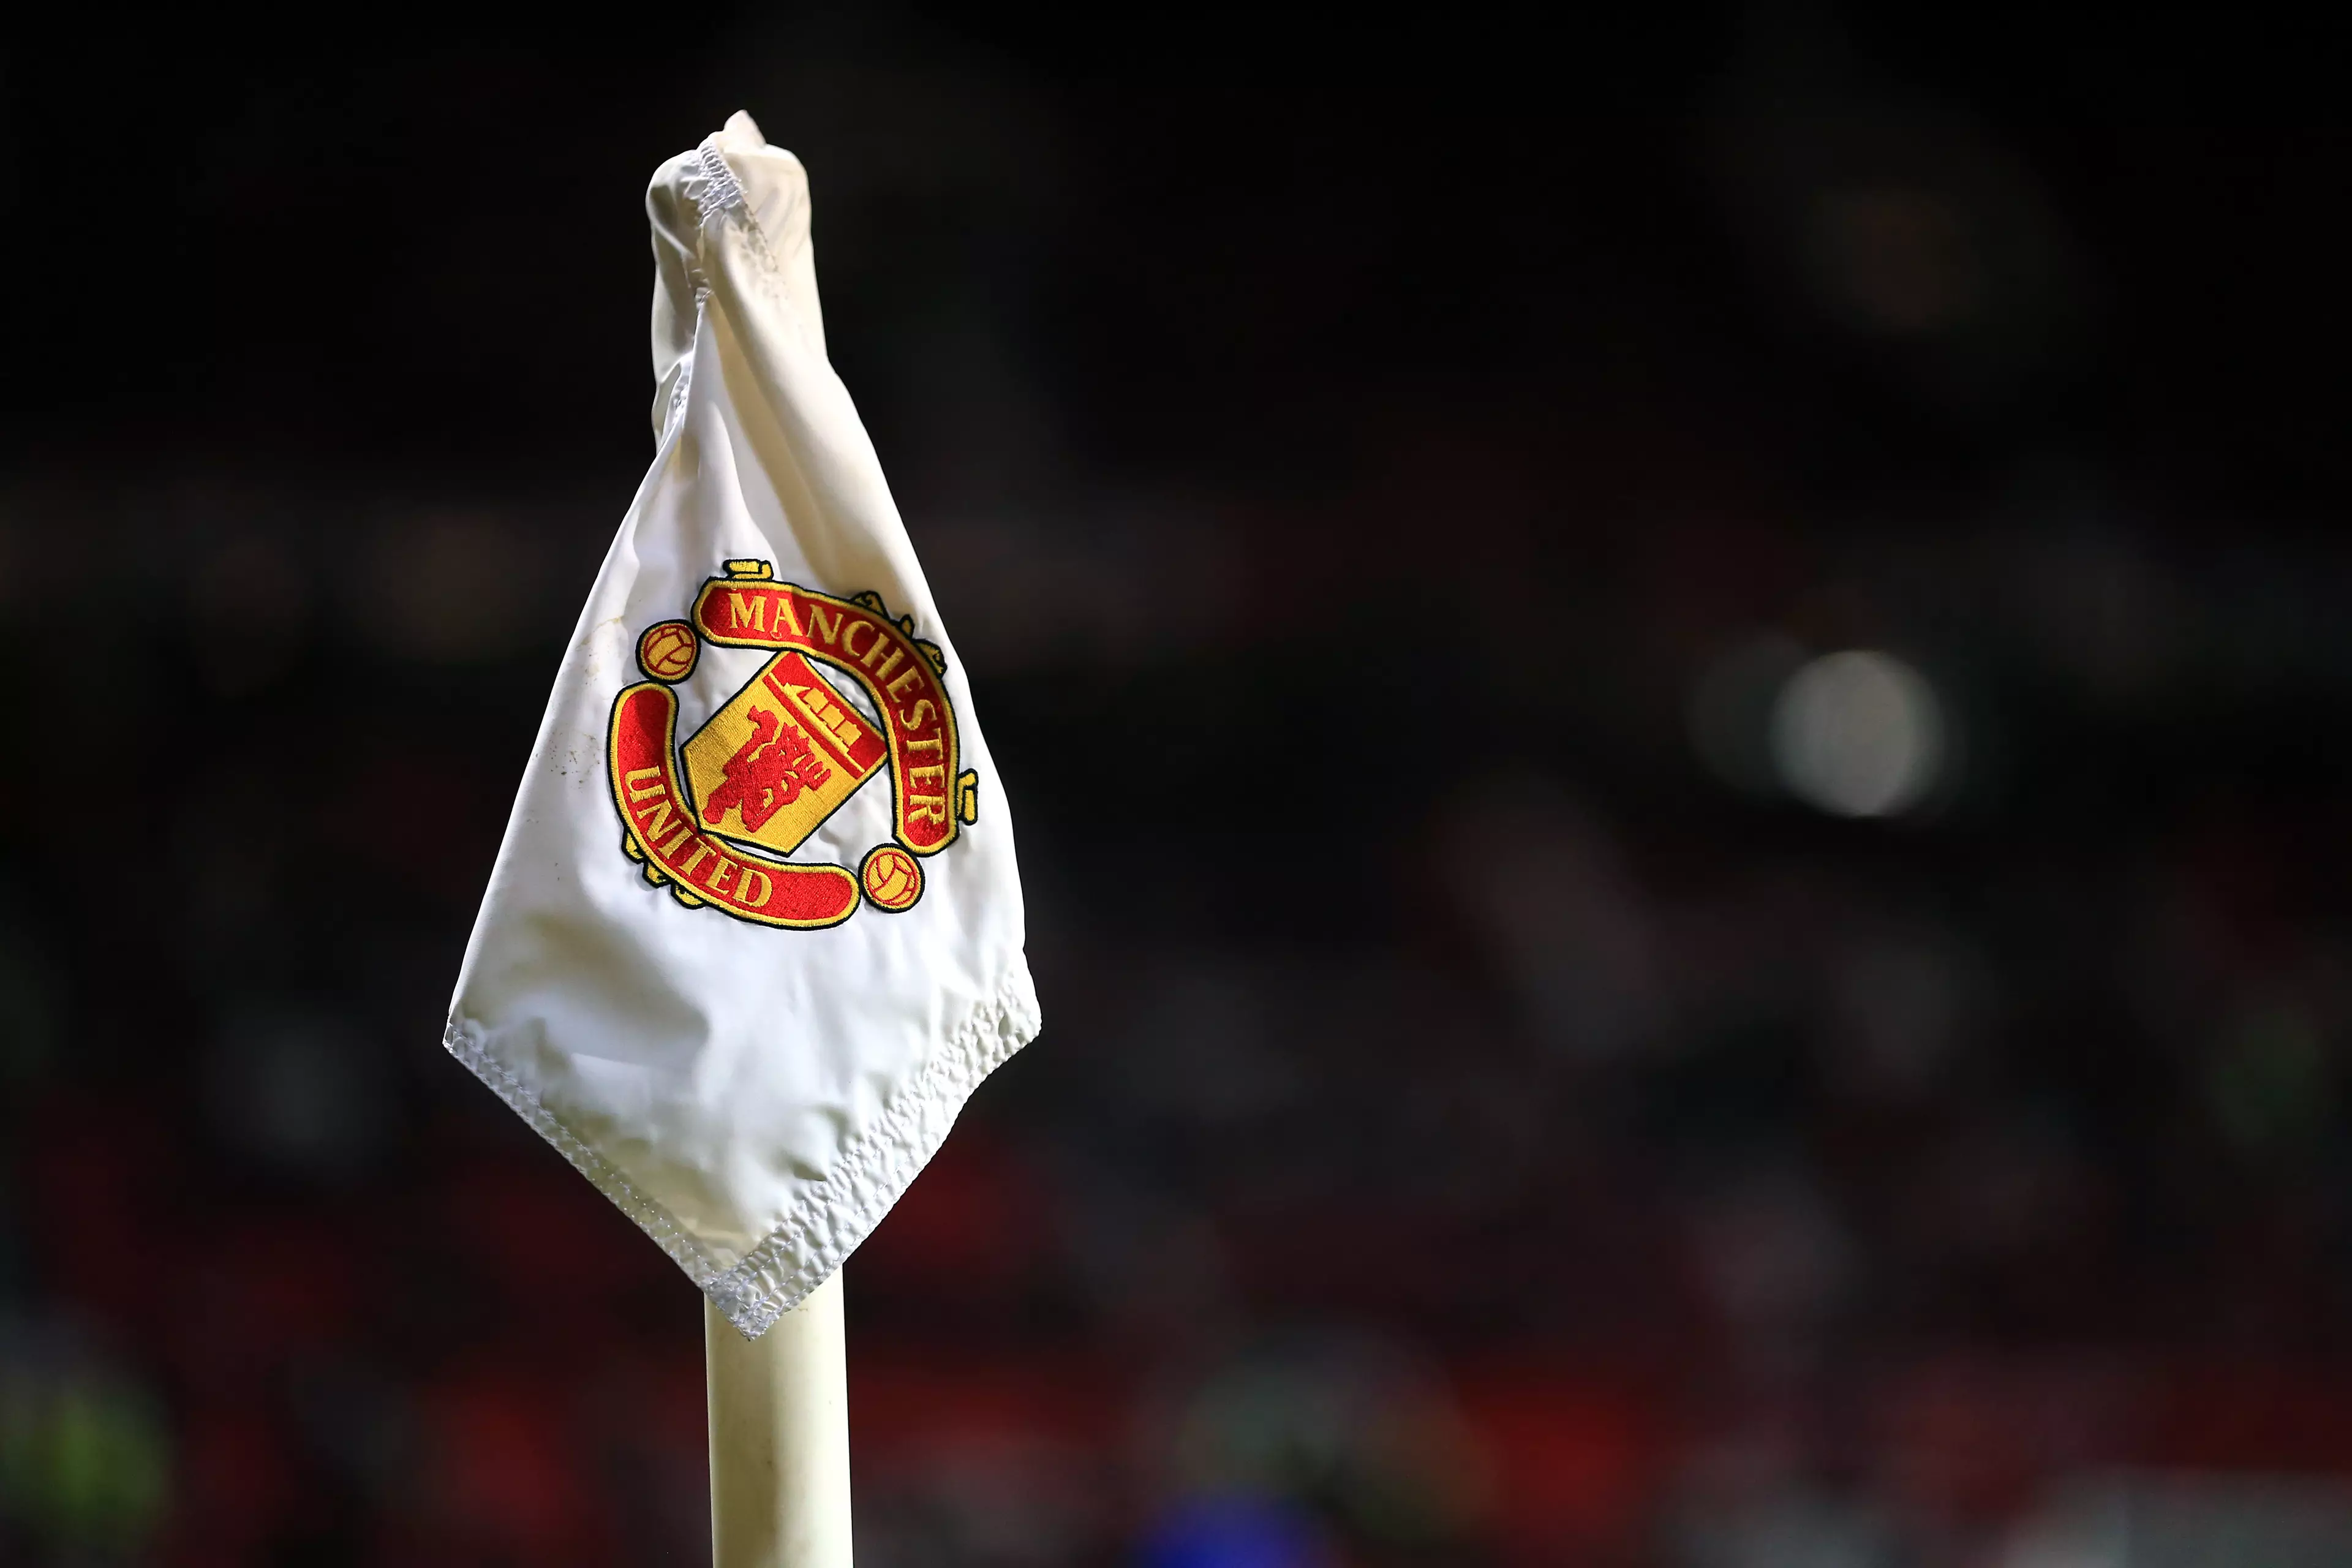 Manchester United Have The Weirdest Club Partnership Ever